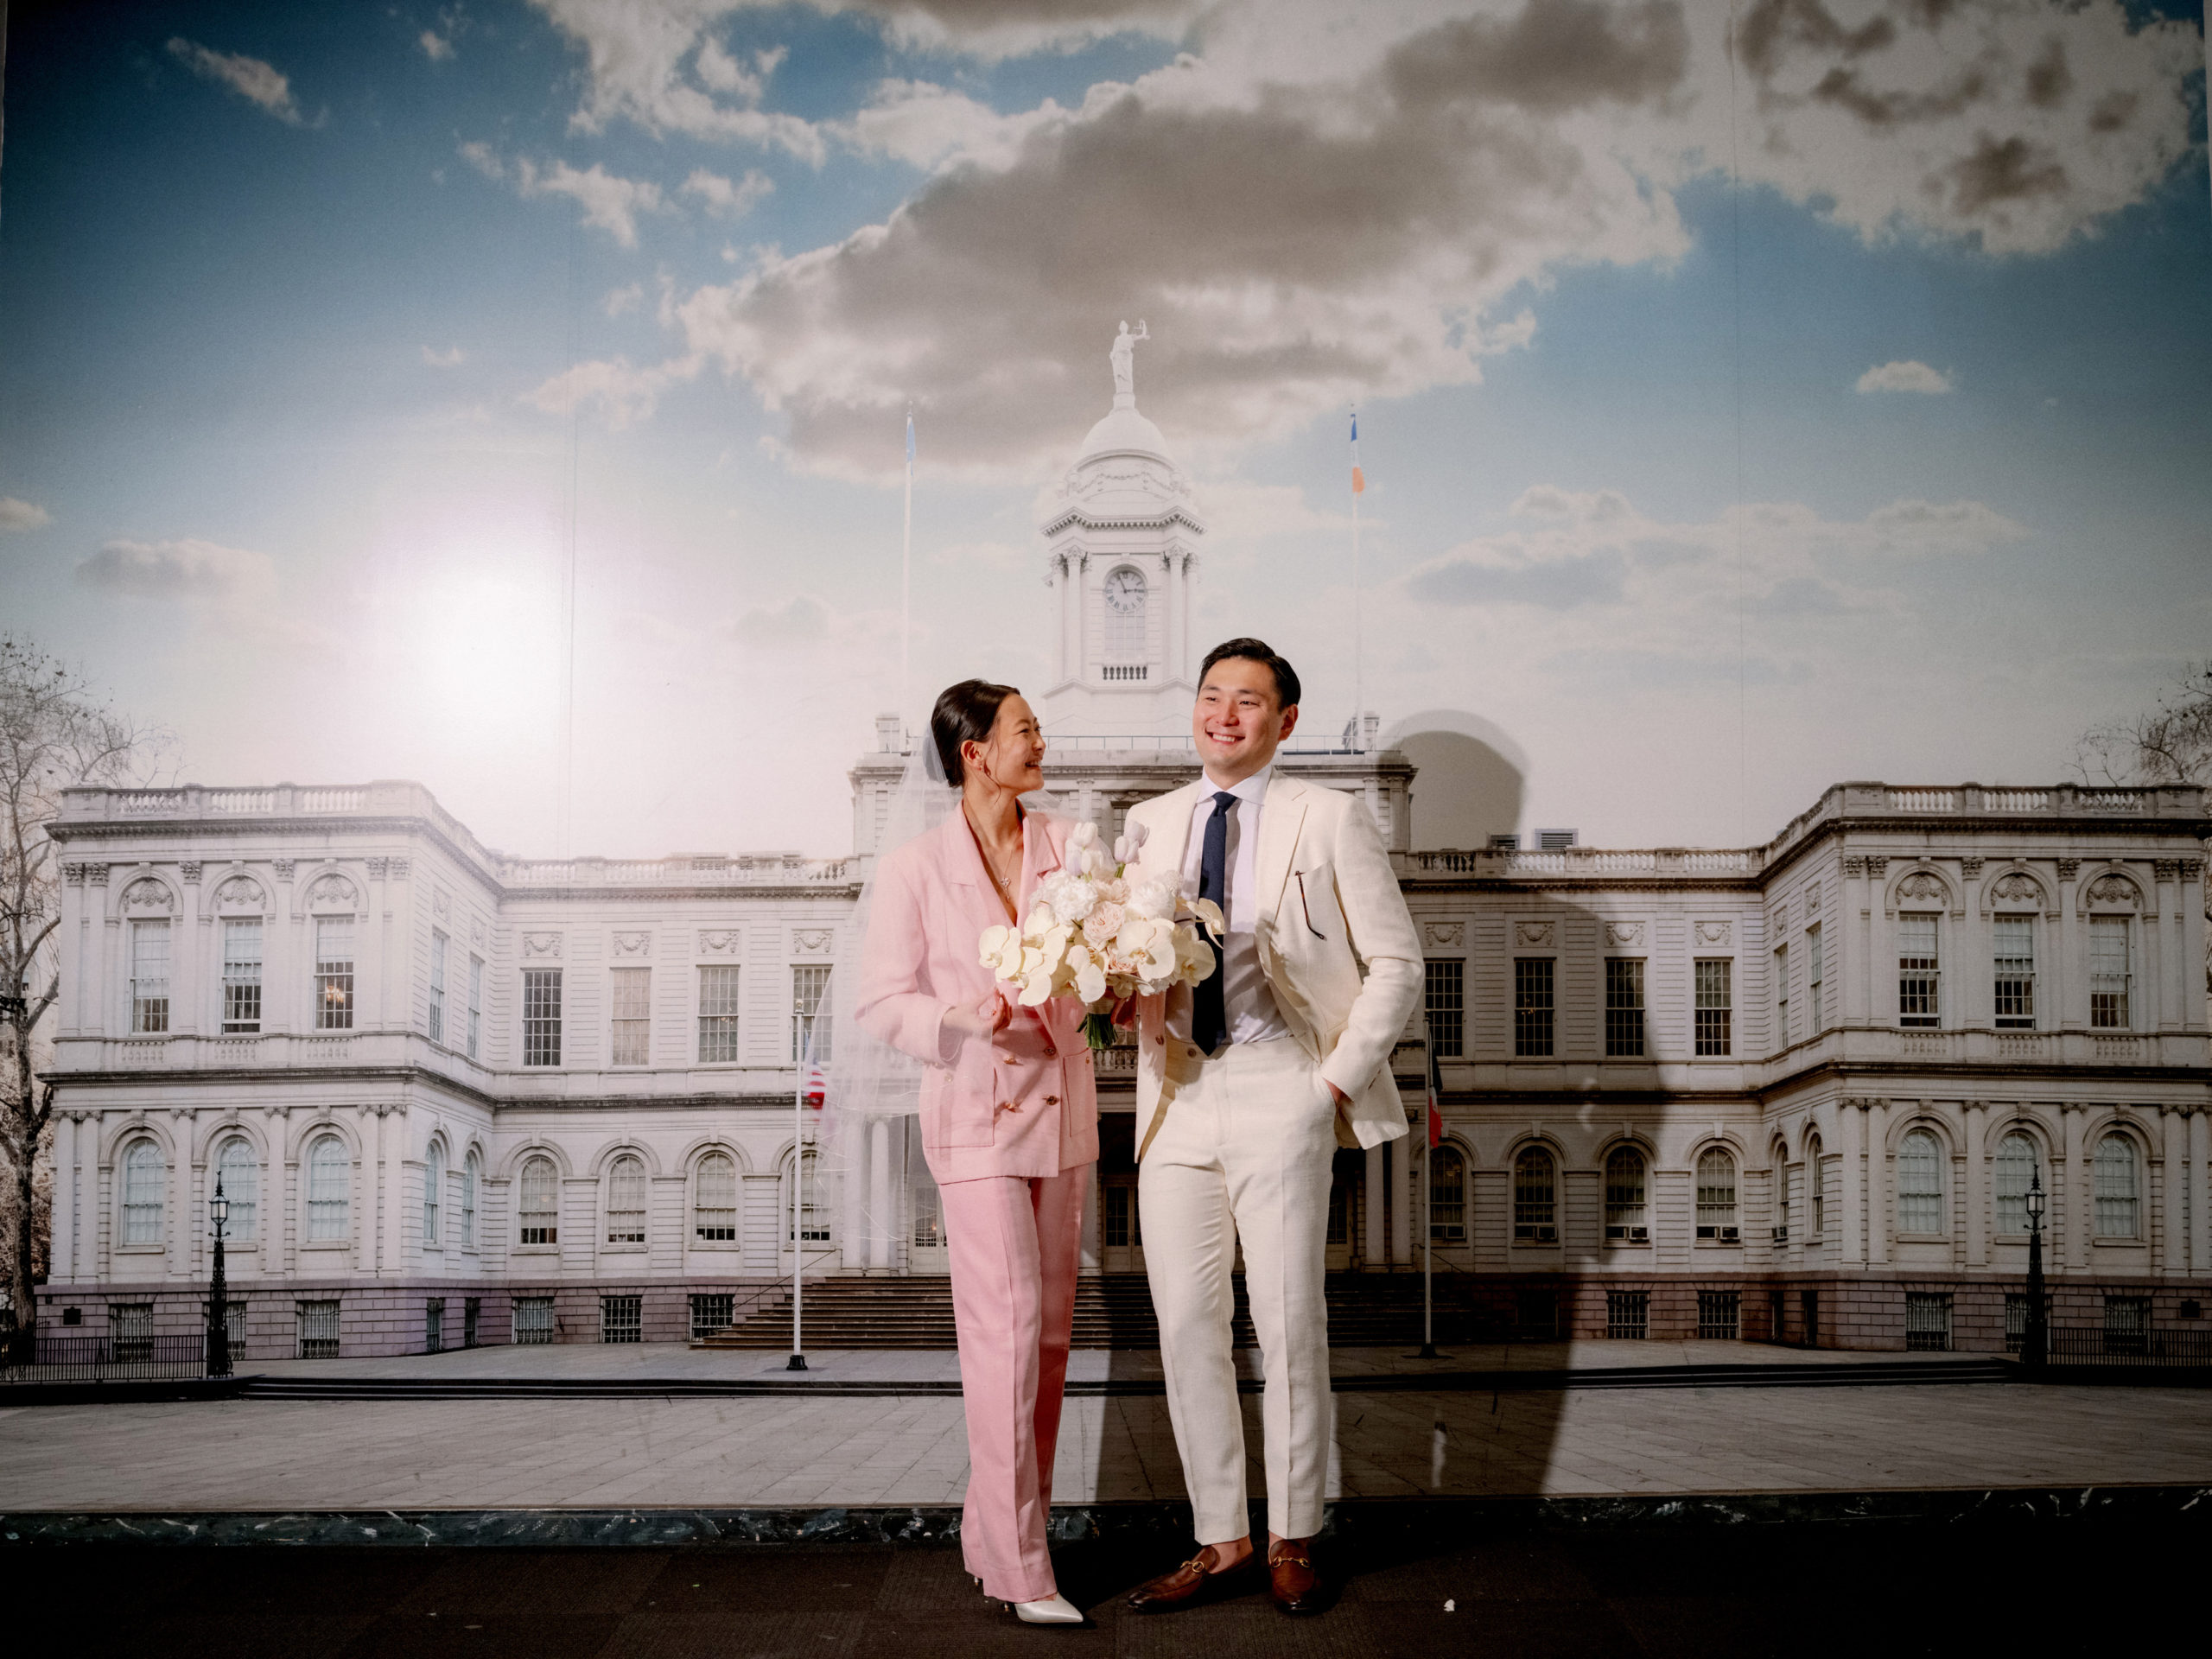 Editorial image of the happy couple with a photo of city hall in the background. NYC City Hall wedding photos image by Jenny Fu Studio